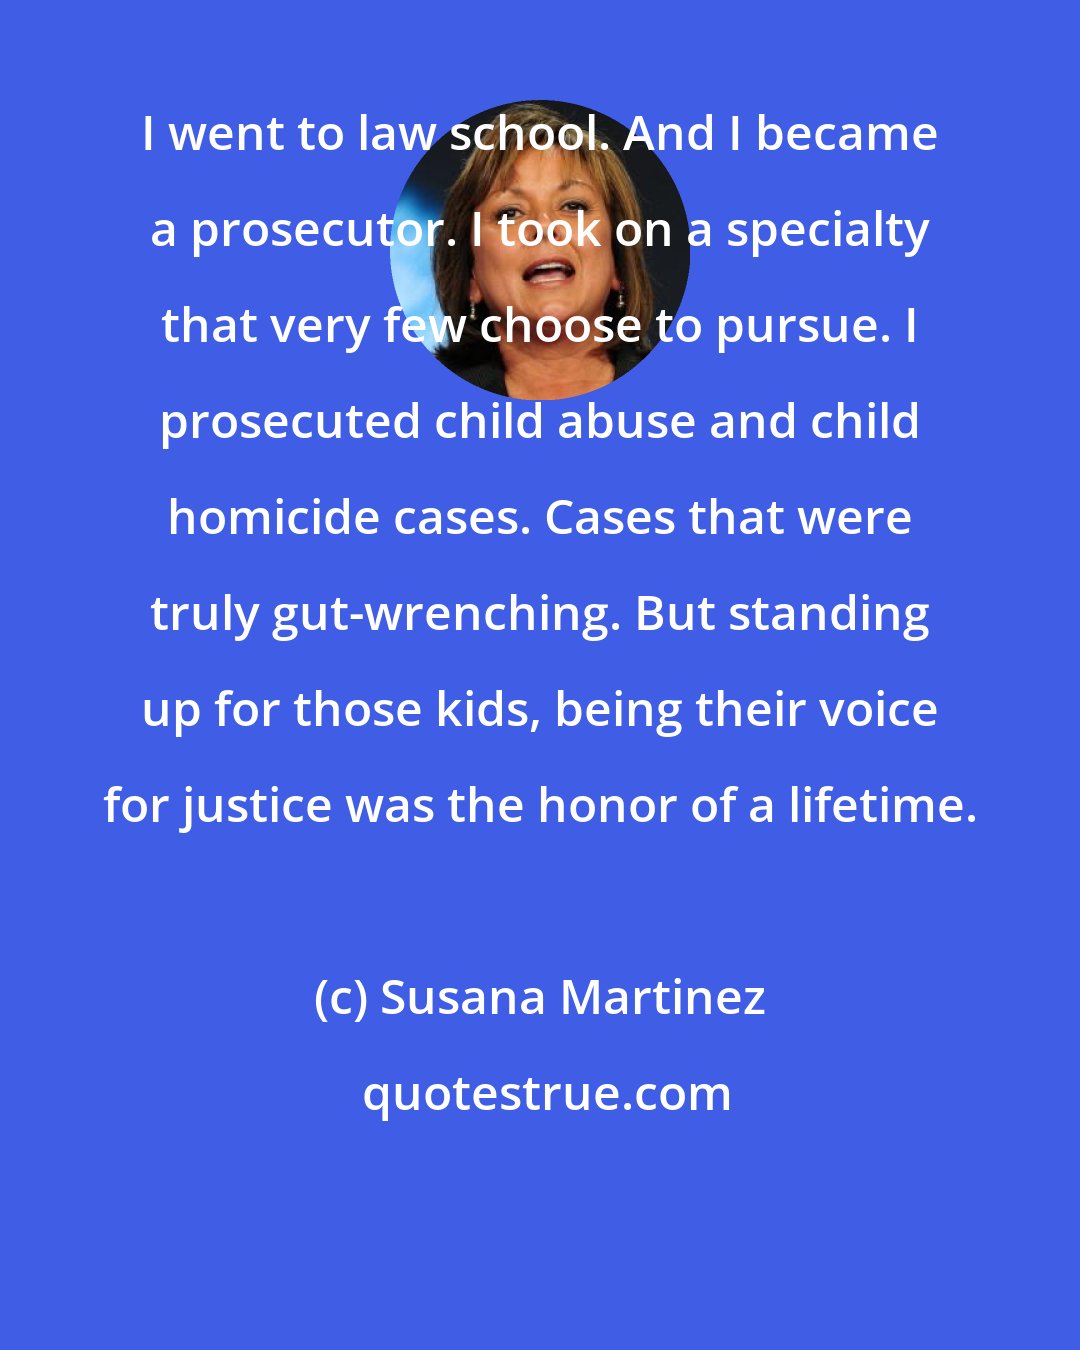 Susana Martinez: I went to law school. And I became a prosecutor. I took on a specialty that very few choose to pursue. I prosecuted child abuse and child homicide cases. Cases that were truly gut-wrenching. But standing up for those kids, being their voice for justice was the honor of a lifetime.